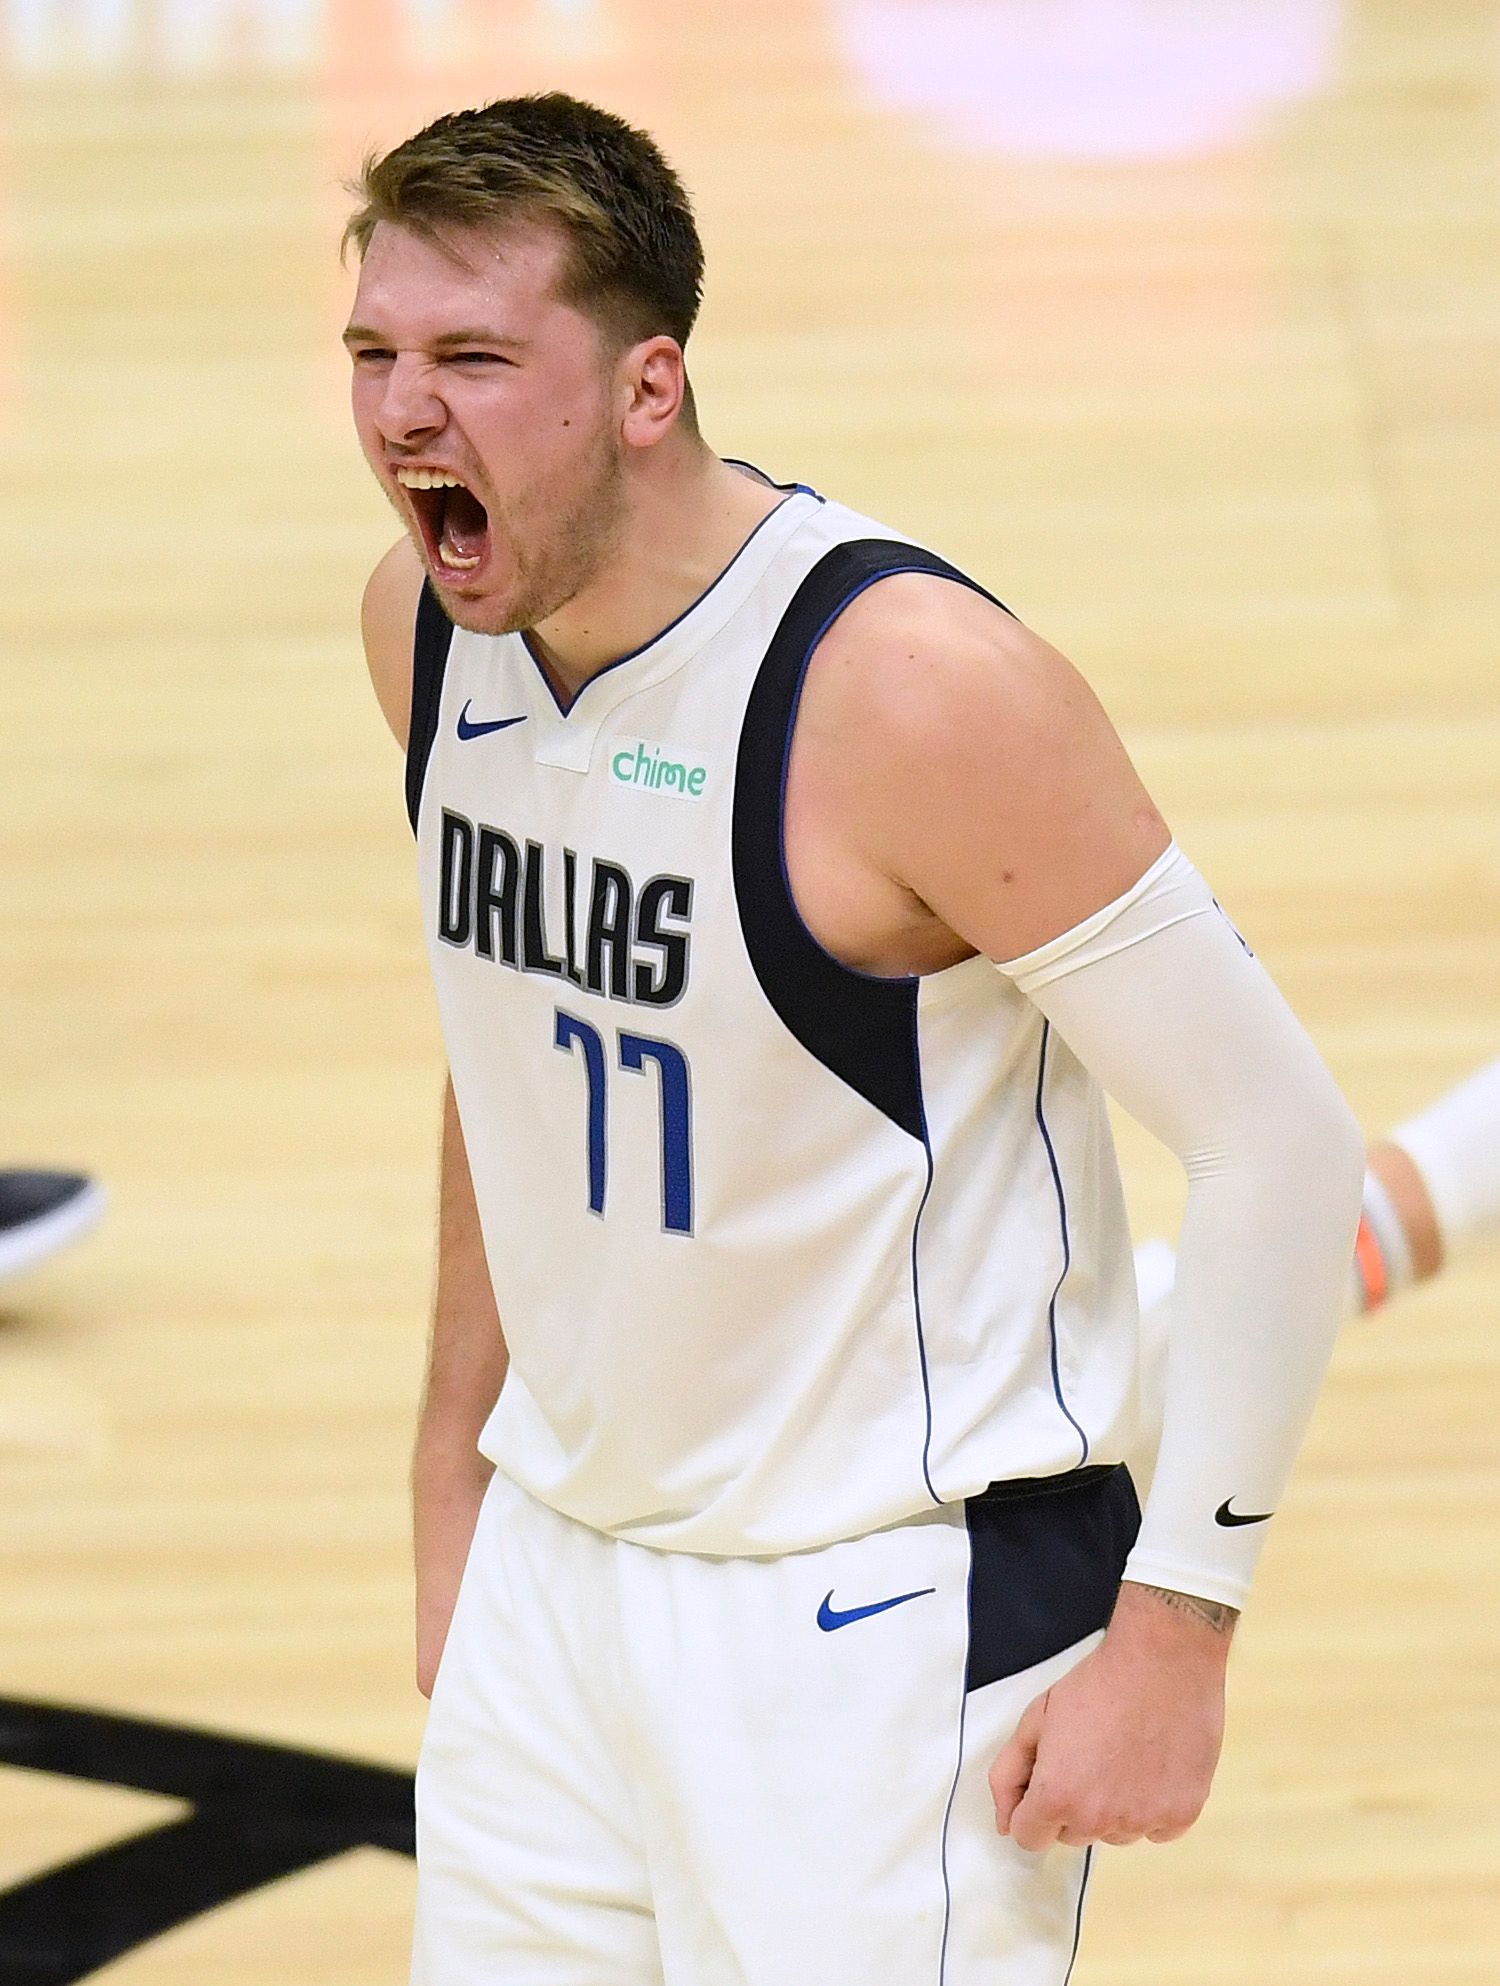 Luka Doncic screams after a successful play